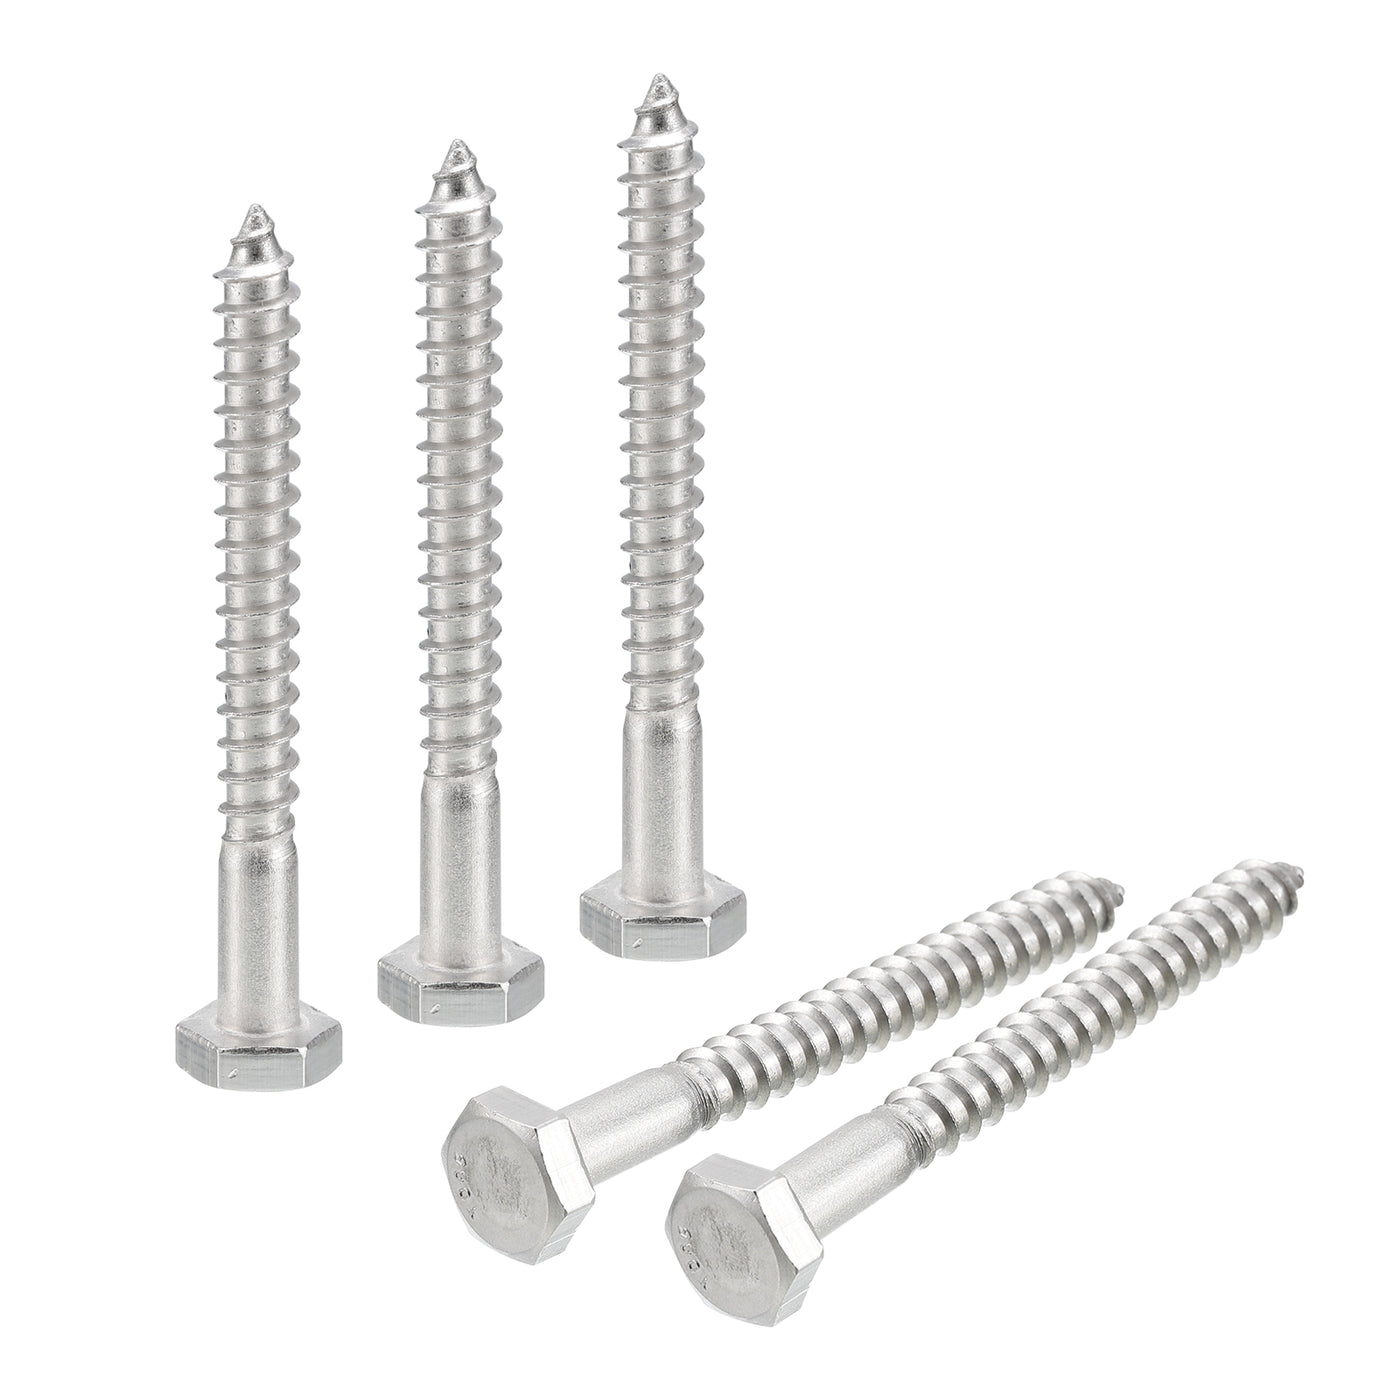 uxcell Uxcell Hex Head Lag Screws Bolts, 25pcs 1/4" x 2-1/2" 304 Stainless Steel Wood Screws